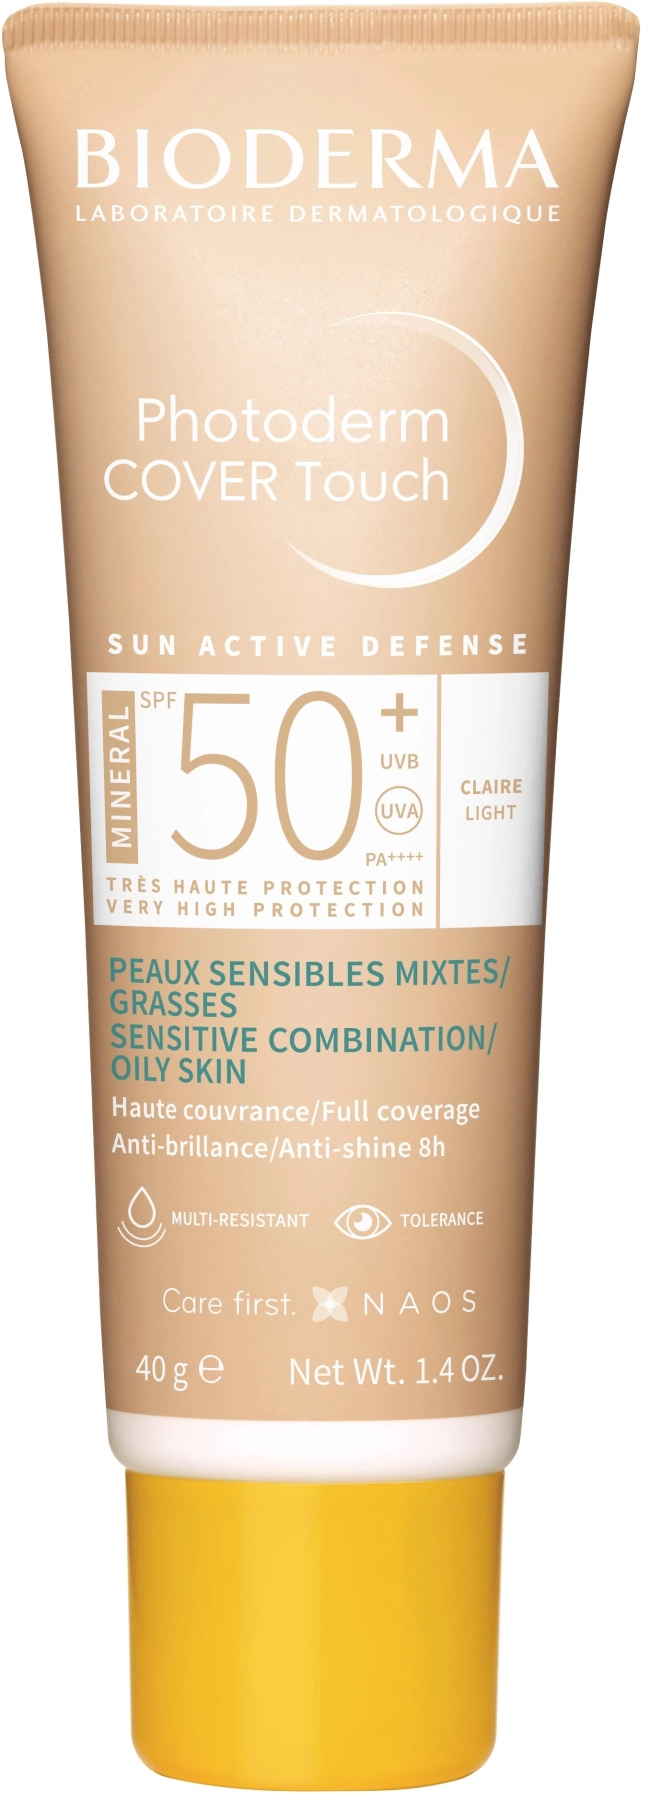 Photoderm COVER Touch SPF 50+ Светъл 40 мл